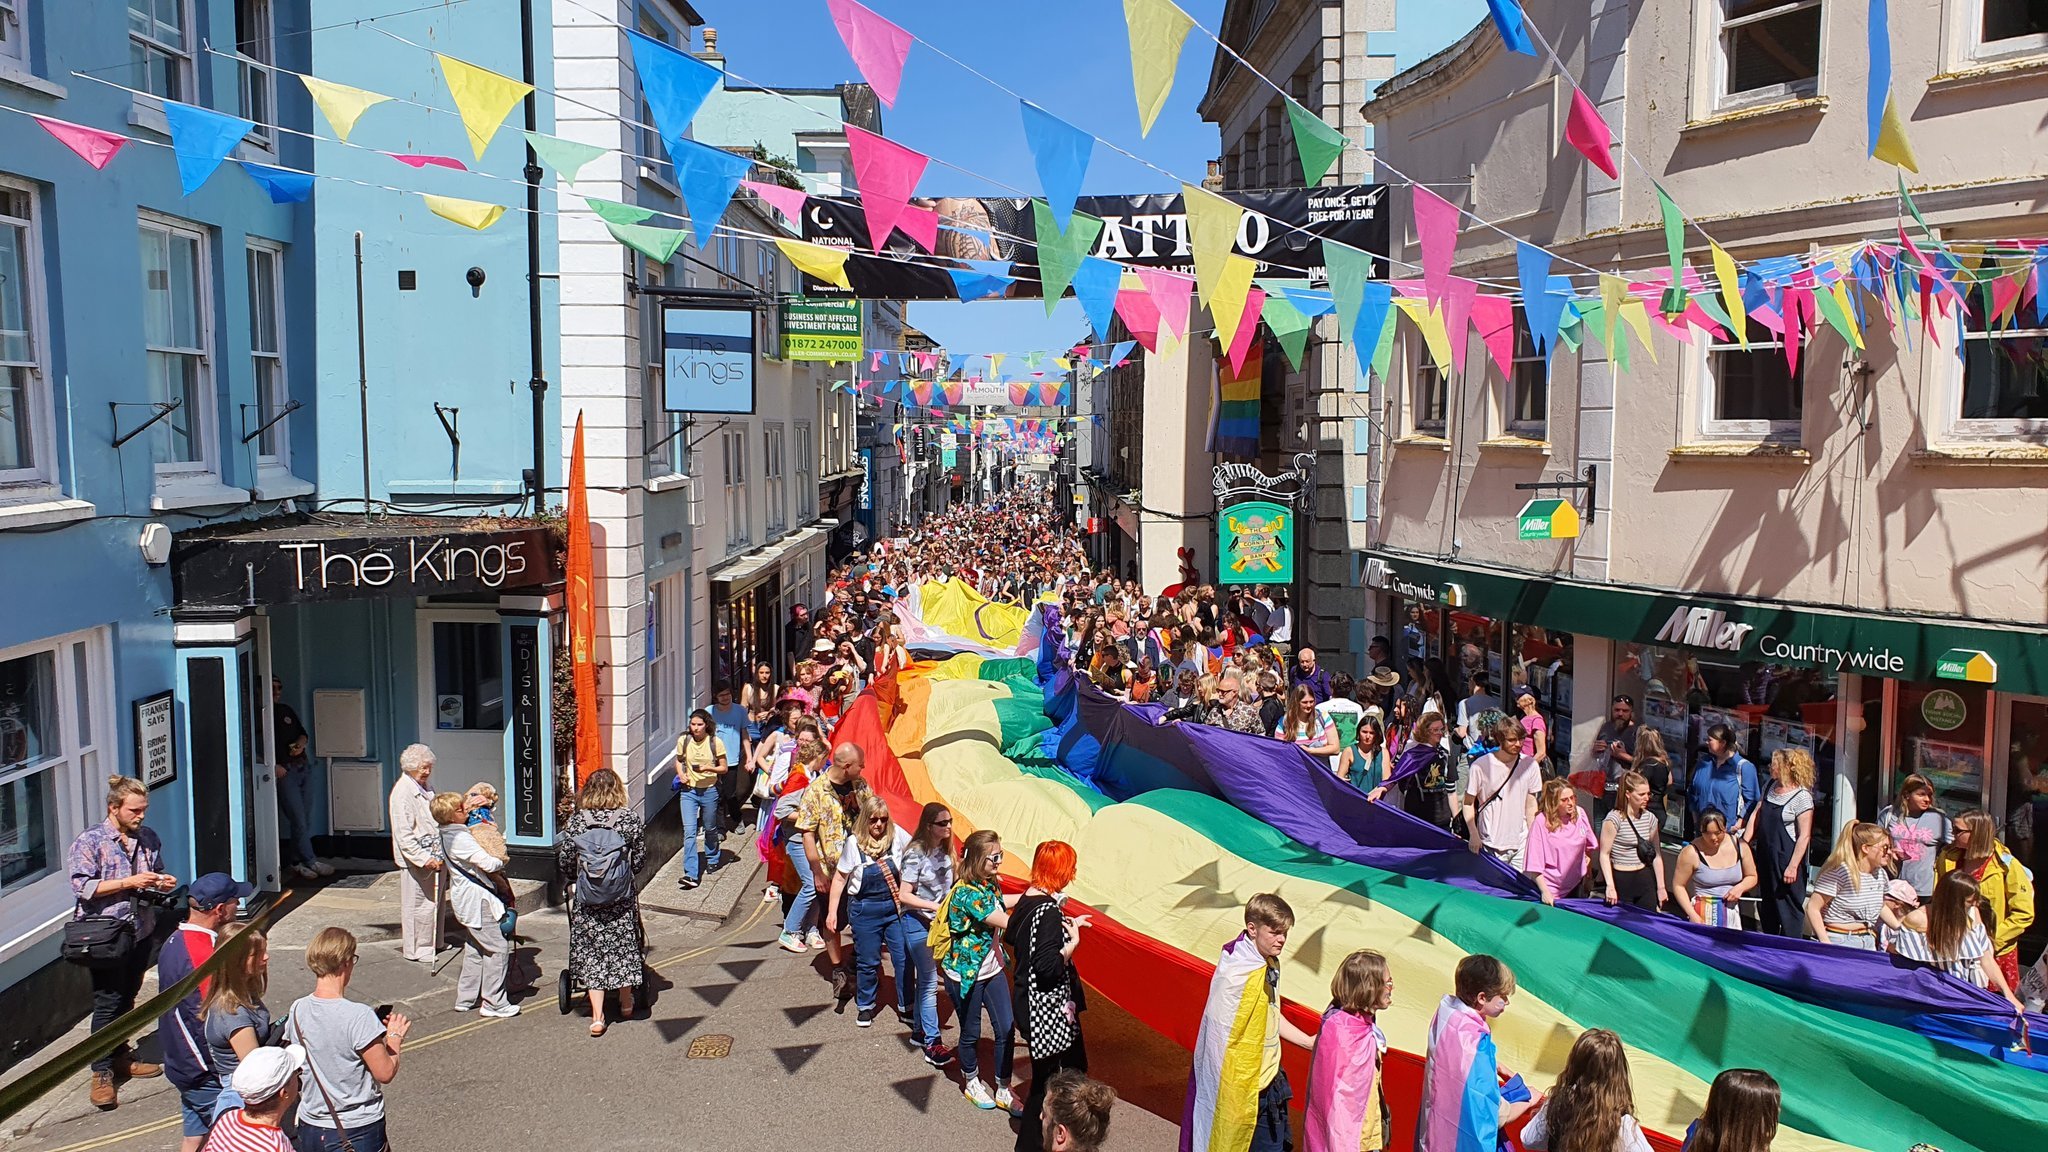 The first Pride march of the month, kicking off in Falmouth with the worlds largest Pride march flag. The march started at the Prince of Wales Pier, went through the centre of town and ended at Events Square. 7th May 2022.